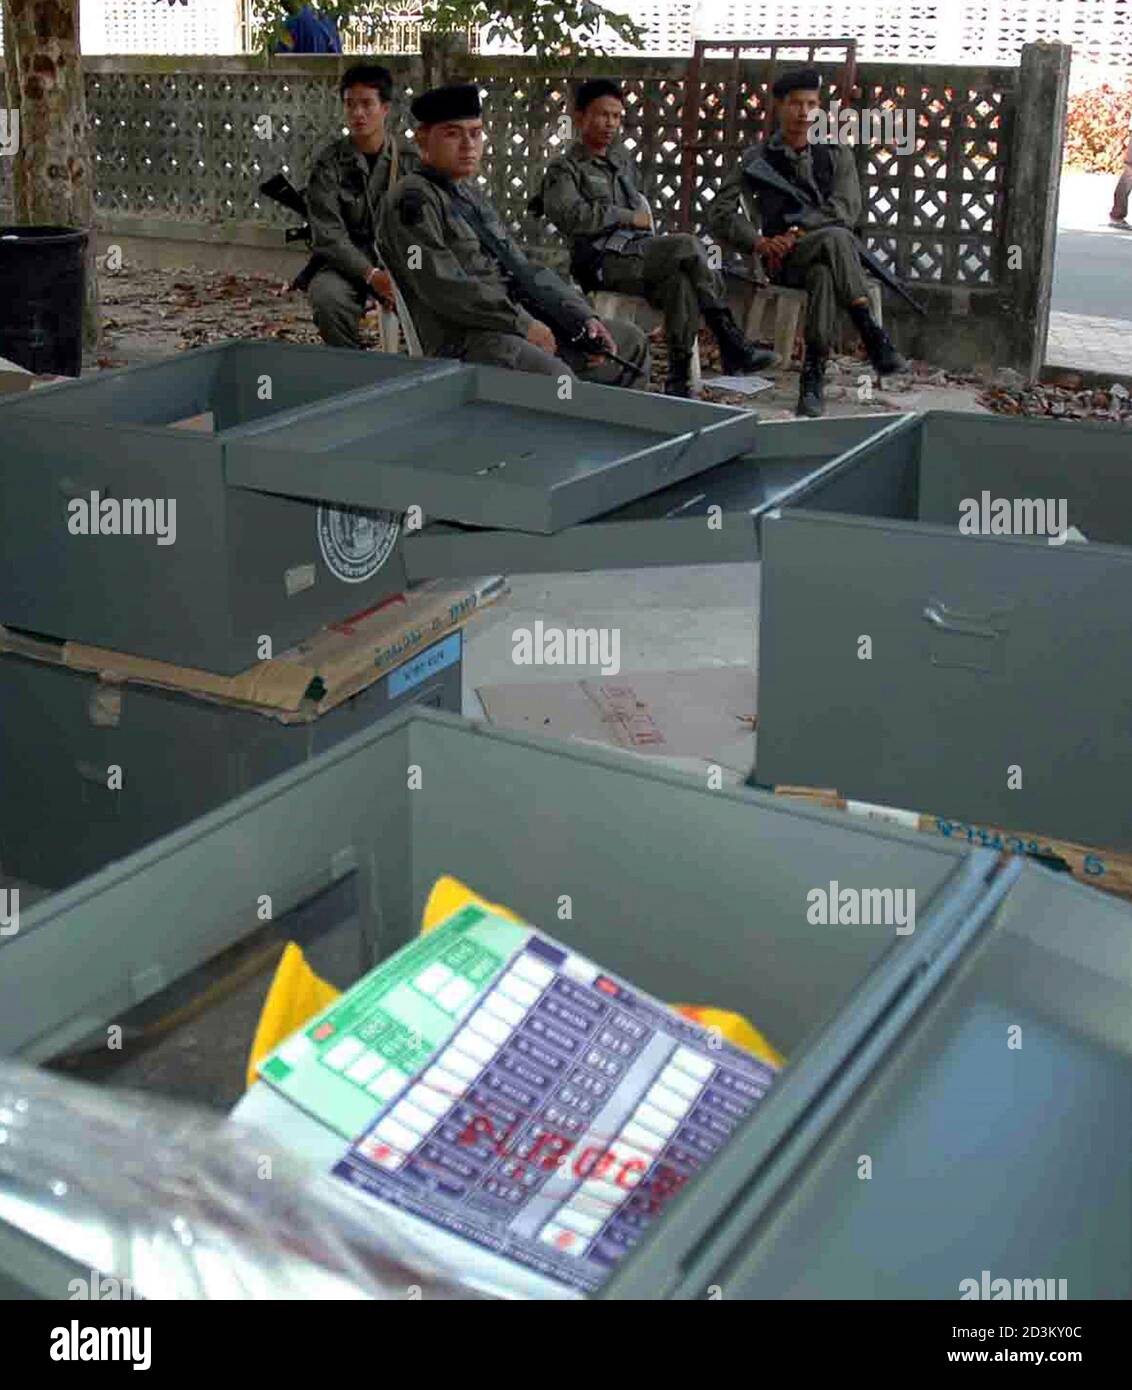 Thai soldiers sit next to ballot boxes ahead of elections in Yala province, 1,200 km (750 miles) south of Bangkok, on February 5, 2005. The national election is scheduled for Sunday. REUTERS/Surapan Boonthanom  SS/SA/LA Stock Photo